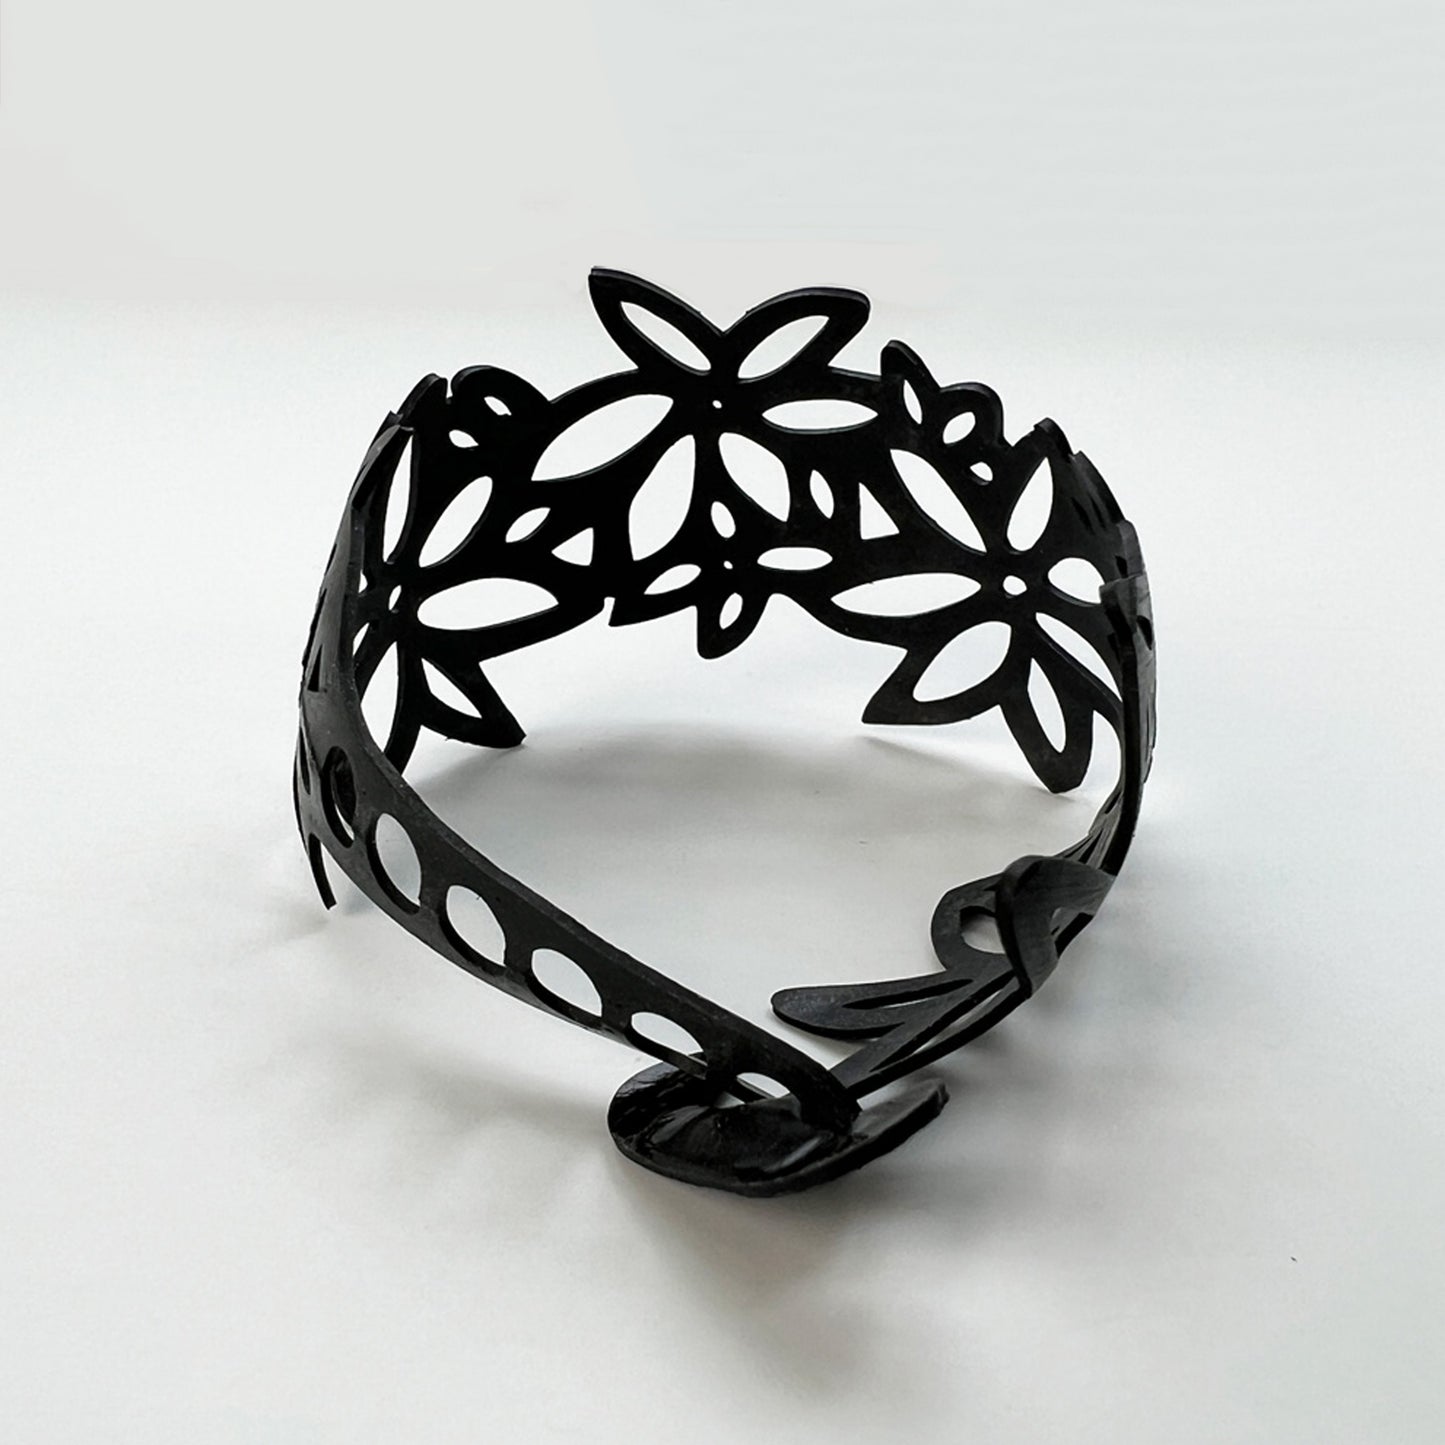 This bracelet was made by cutting intricate daisy designs into a bicycle inner tube. The bracelet is 1.25 inches wide. The biggest daisies are about an inch. It has a t-shape clasp that fits into one of six holes making this bracelet suitable for a wide range of wrist sizes